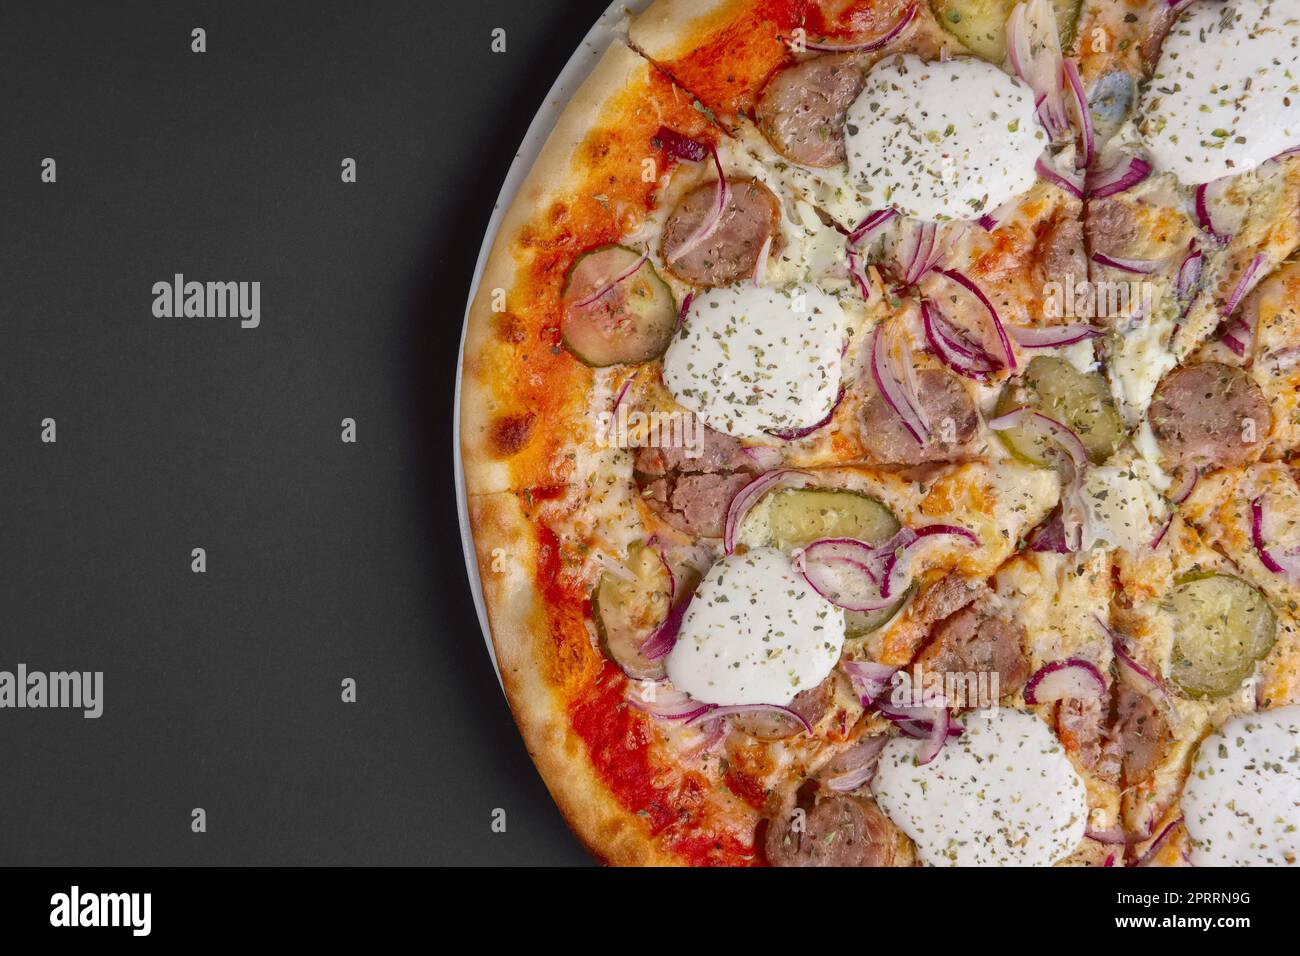 food, sauce, vegetable, white, snack, horseradish, hot, meal, fast, homemade, sausage, fresh, cheese, condiment, ingredient, natural, background, seasoning, tasty, tomato, dish, restaurant, pizza, cream, sausage, cucumber, ham, onion, cuisine, delicious, Stock Photo